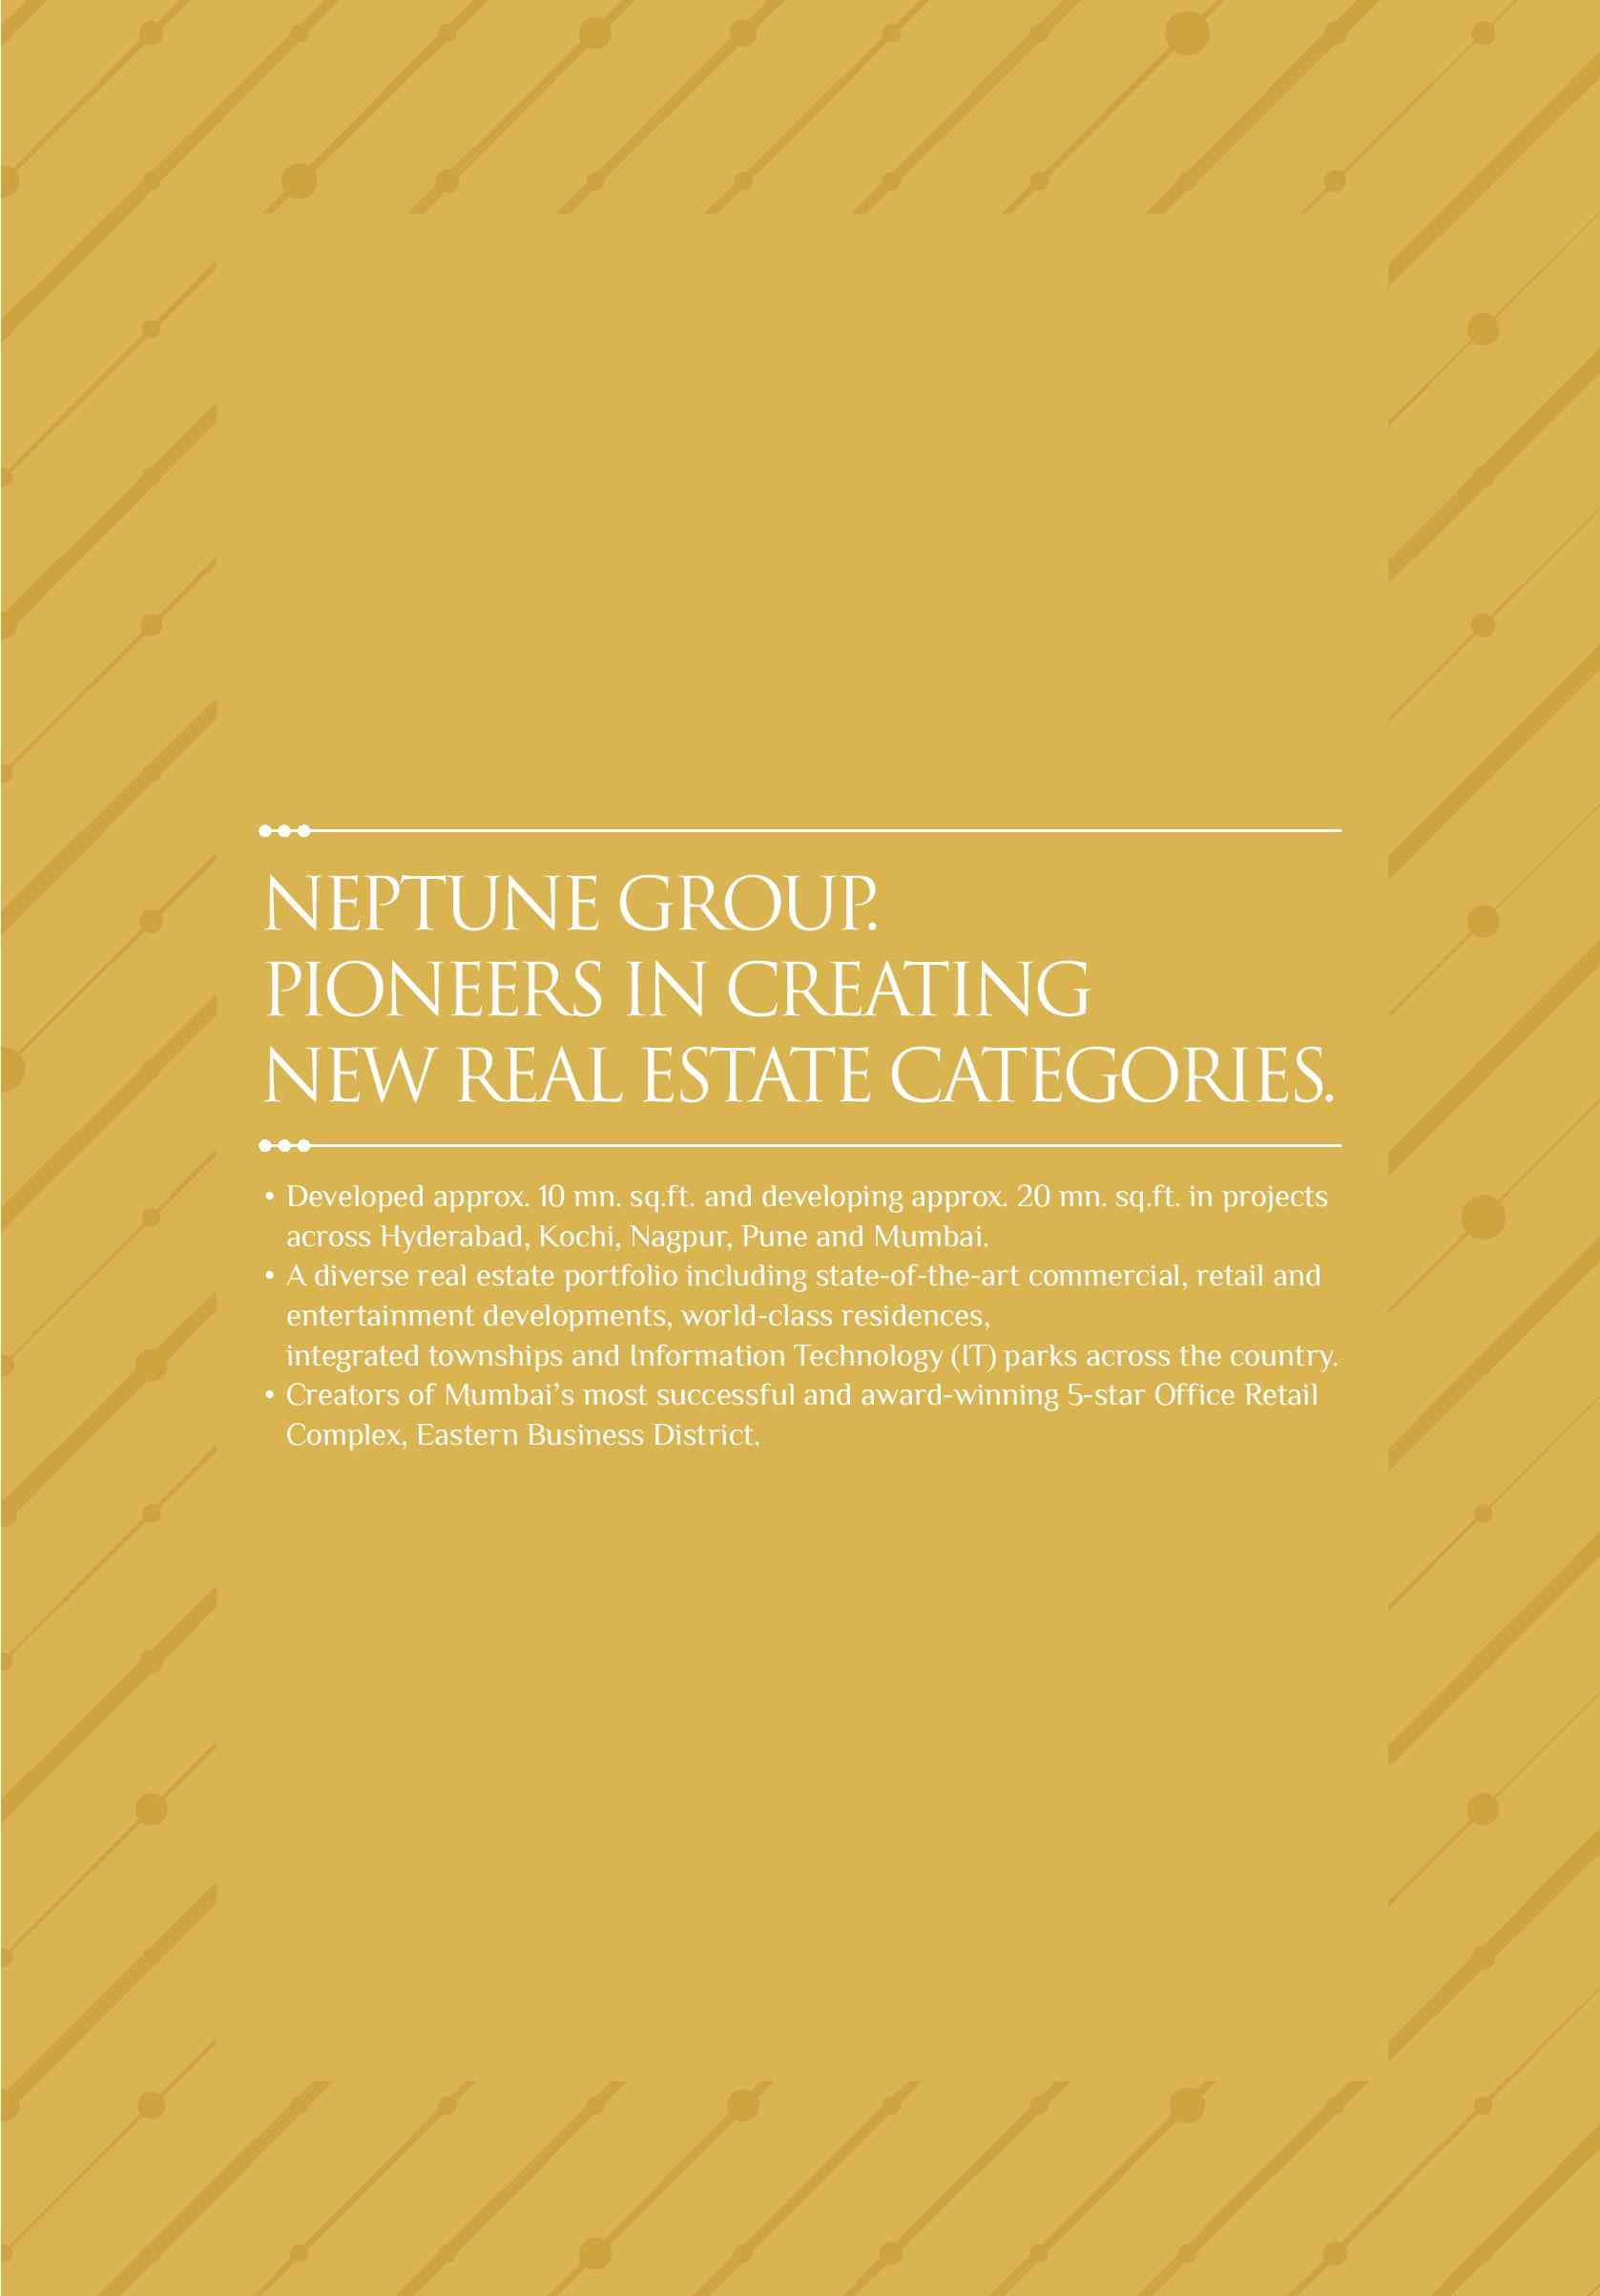 Neptune Group partnering with the finest & creating new Real Estate categories